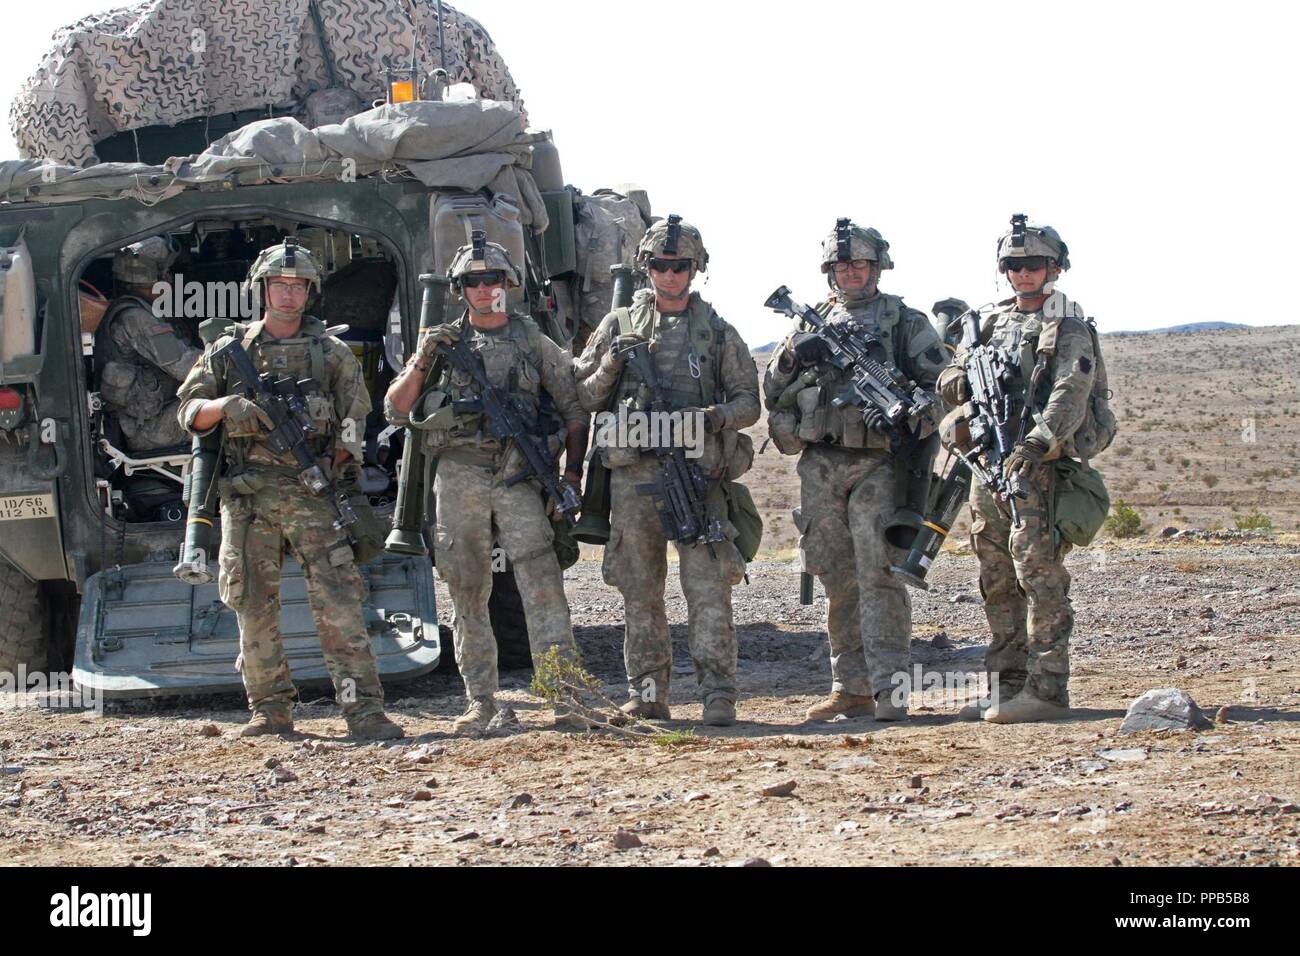 From left to right, Spc. Joshua Decker, Spc. Dylan Leonard, Sgt. Kevin  Litz, Spc. Sam Garman, and Spc. William Reed, all infantrymen with Alpha  Company, 2nd Battalion, 112th Infantry Regiment, 56th Stryker